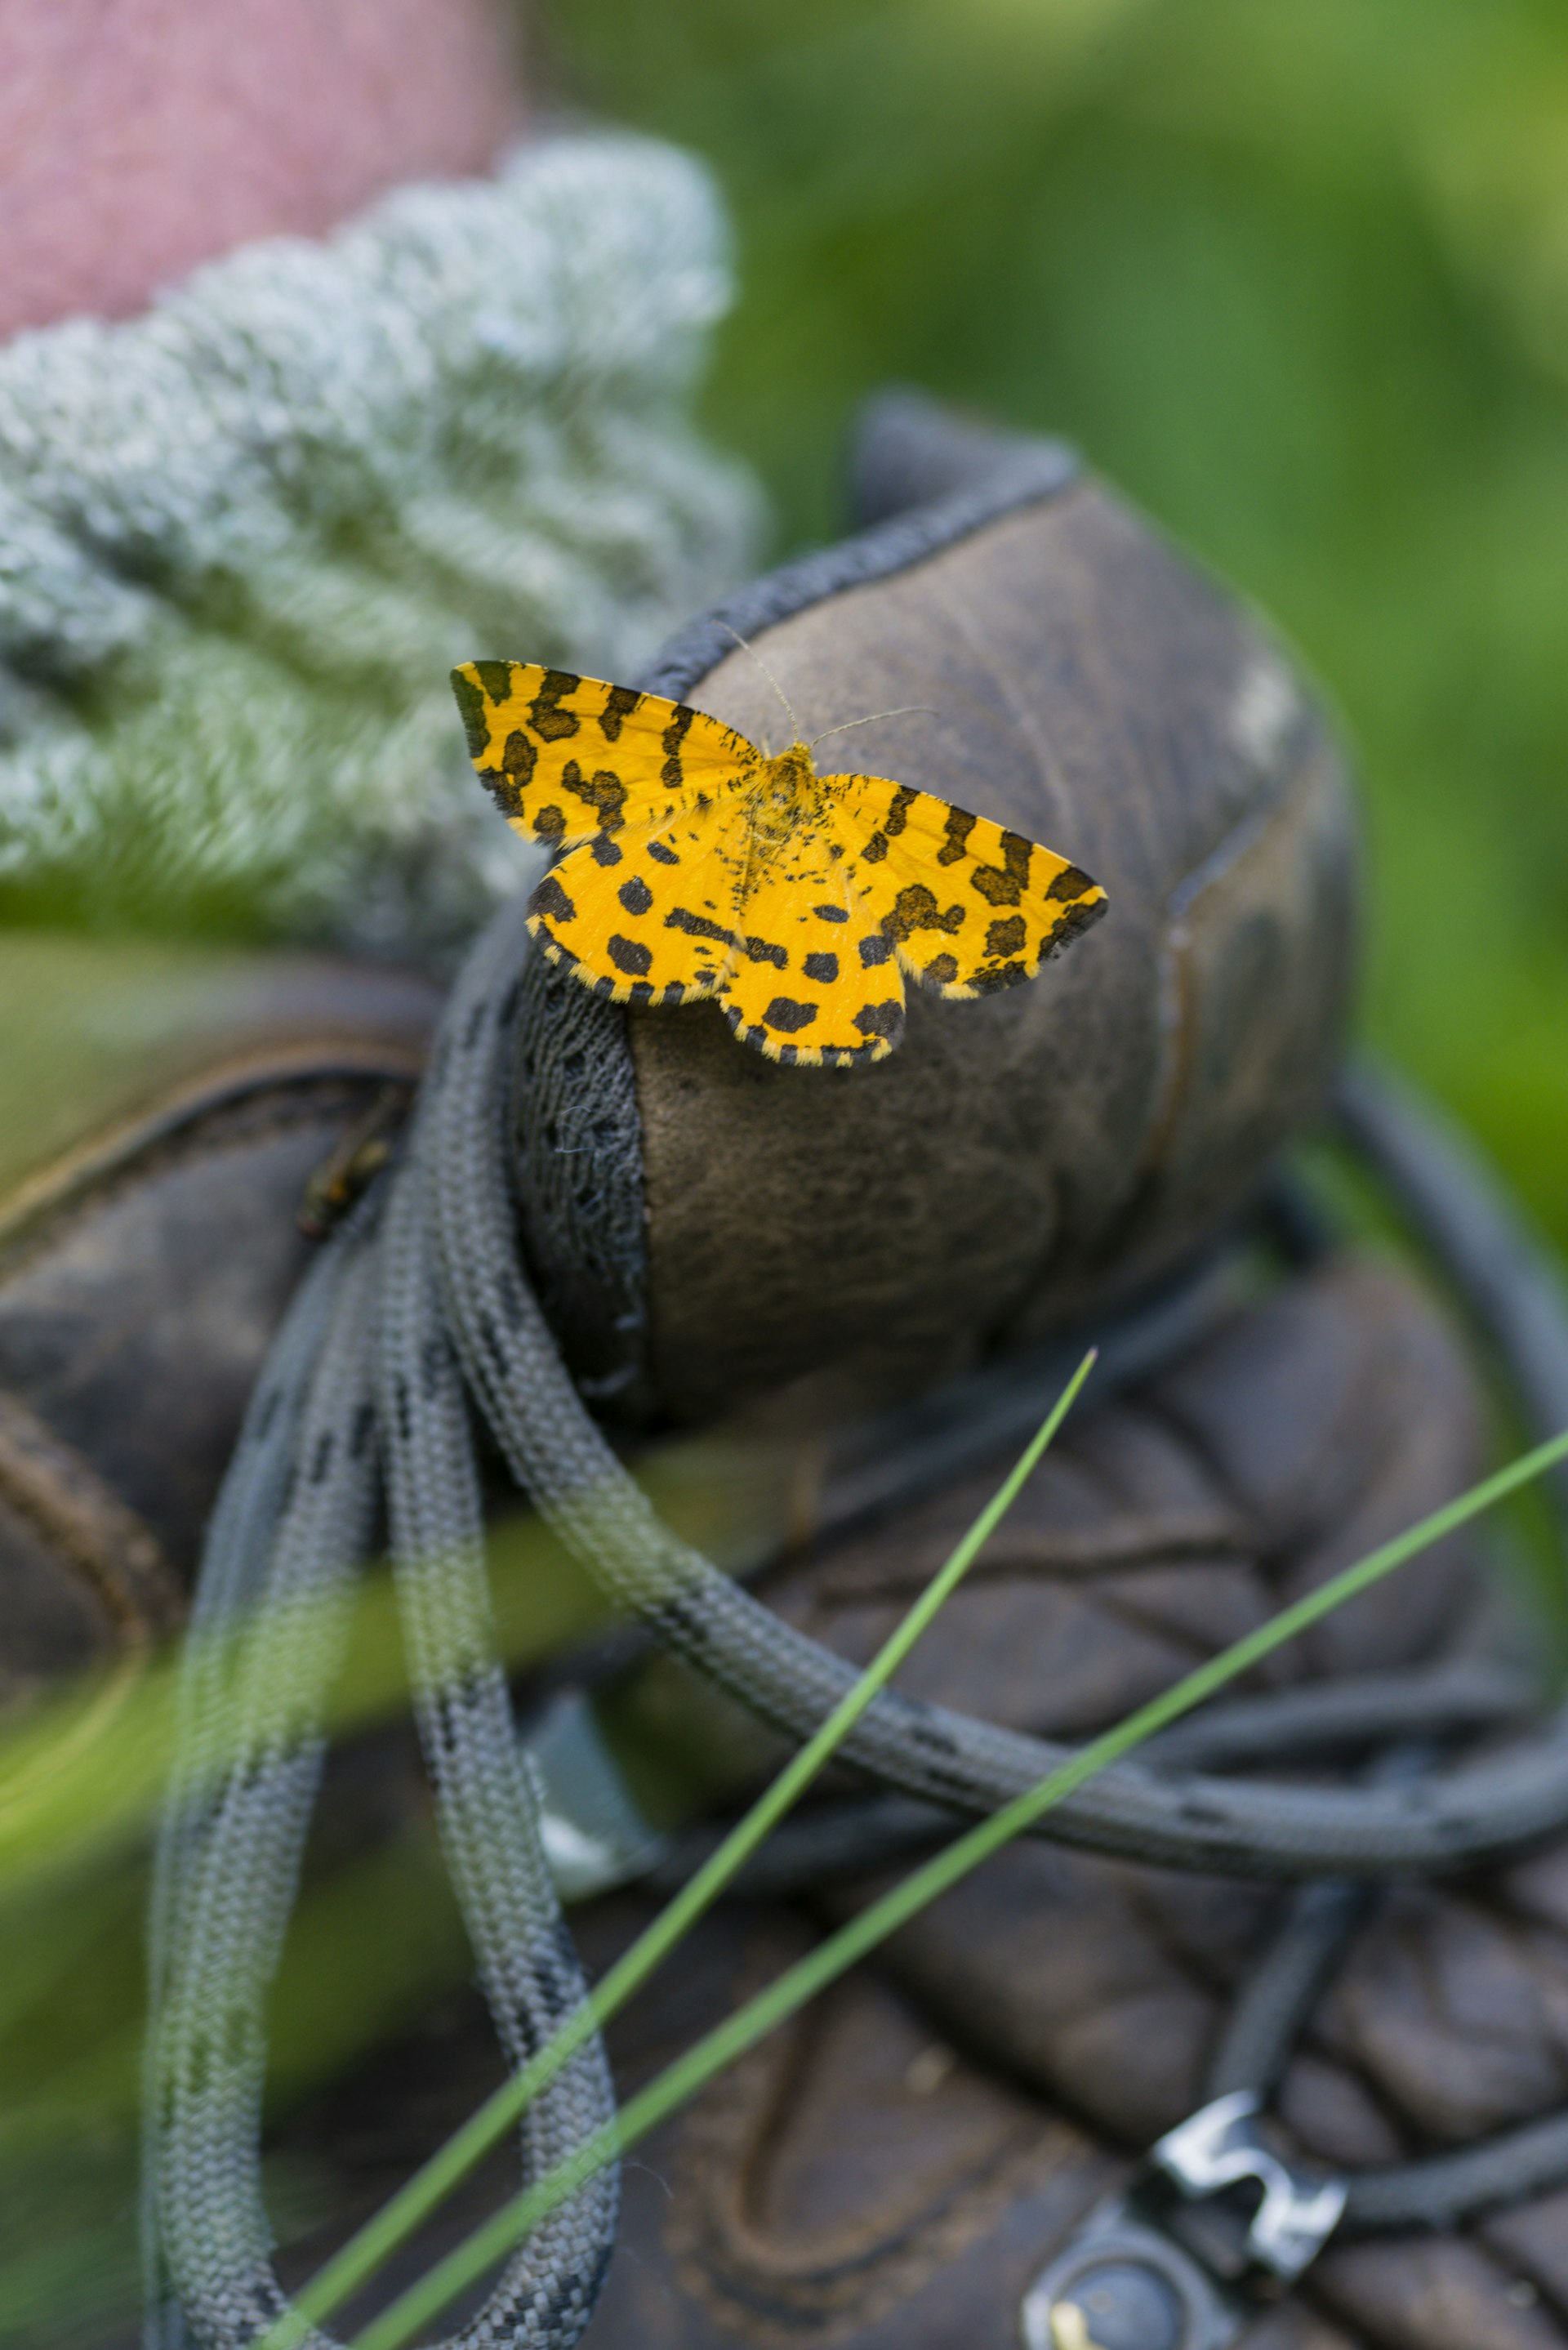 A yellow moth on the tongue of a walking boot